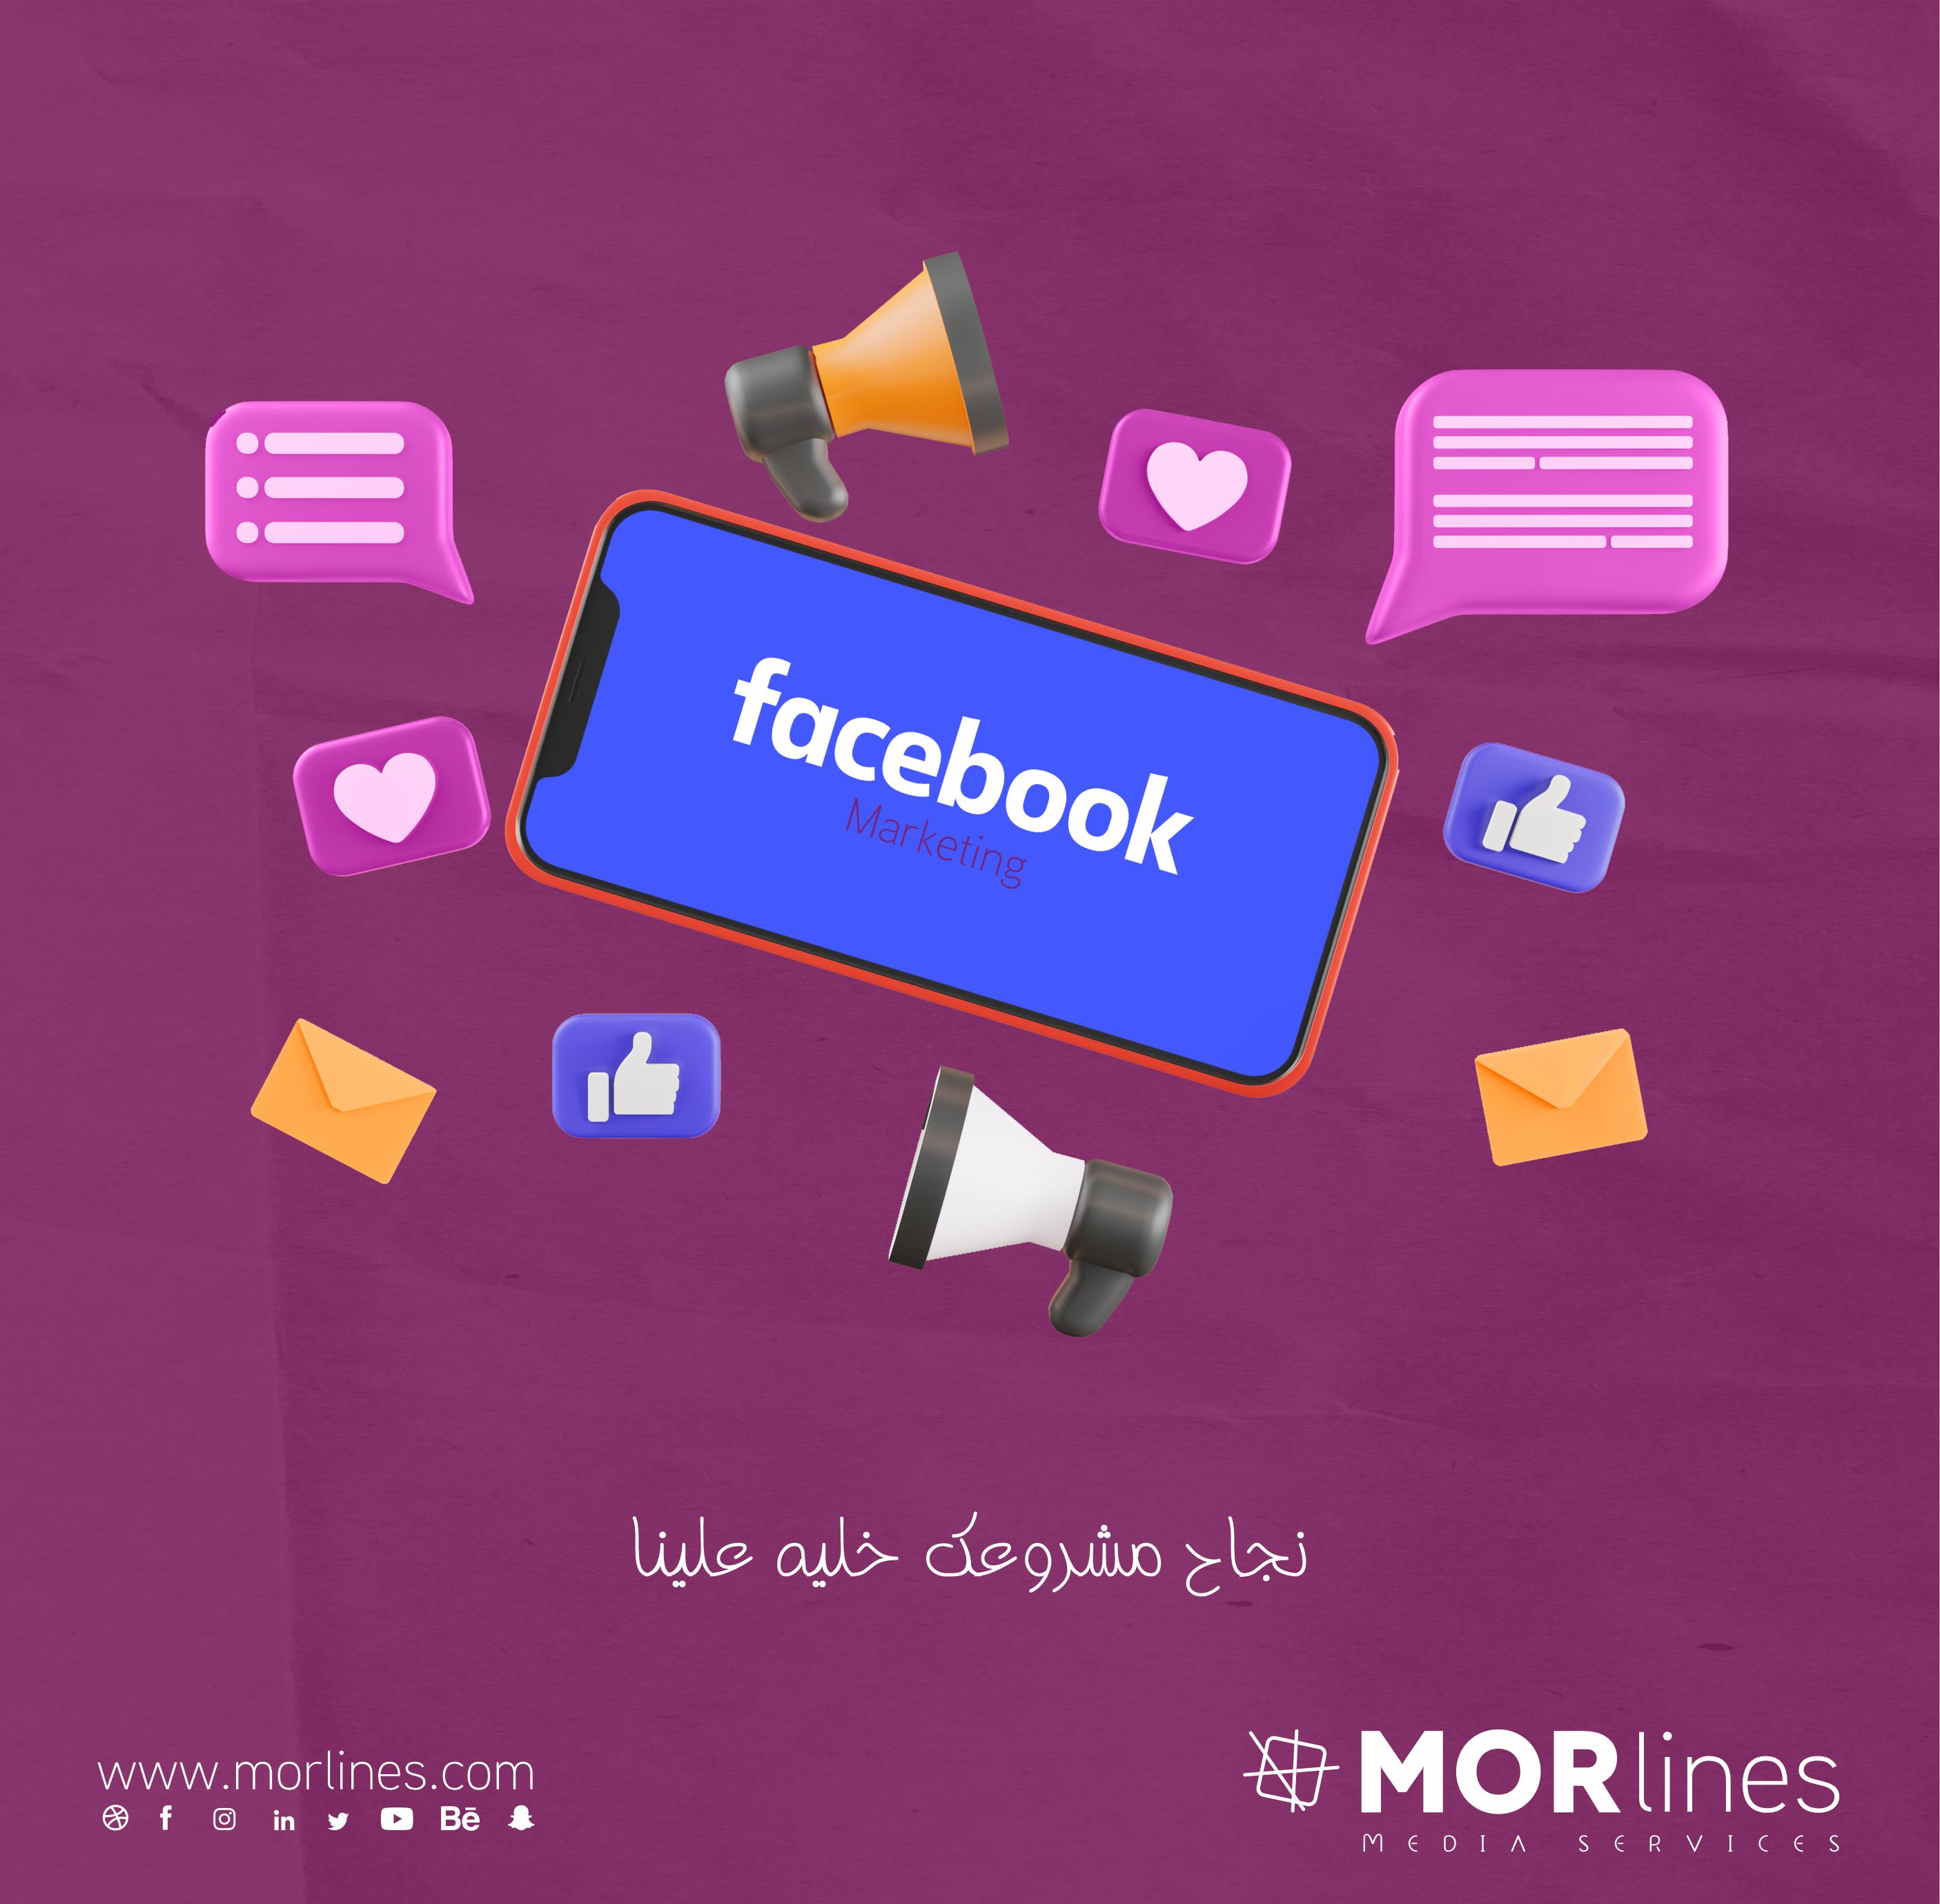 Types of advertising campaigns on Facebook